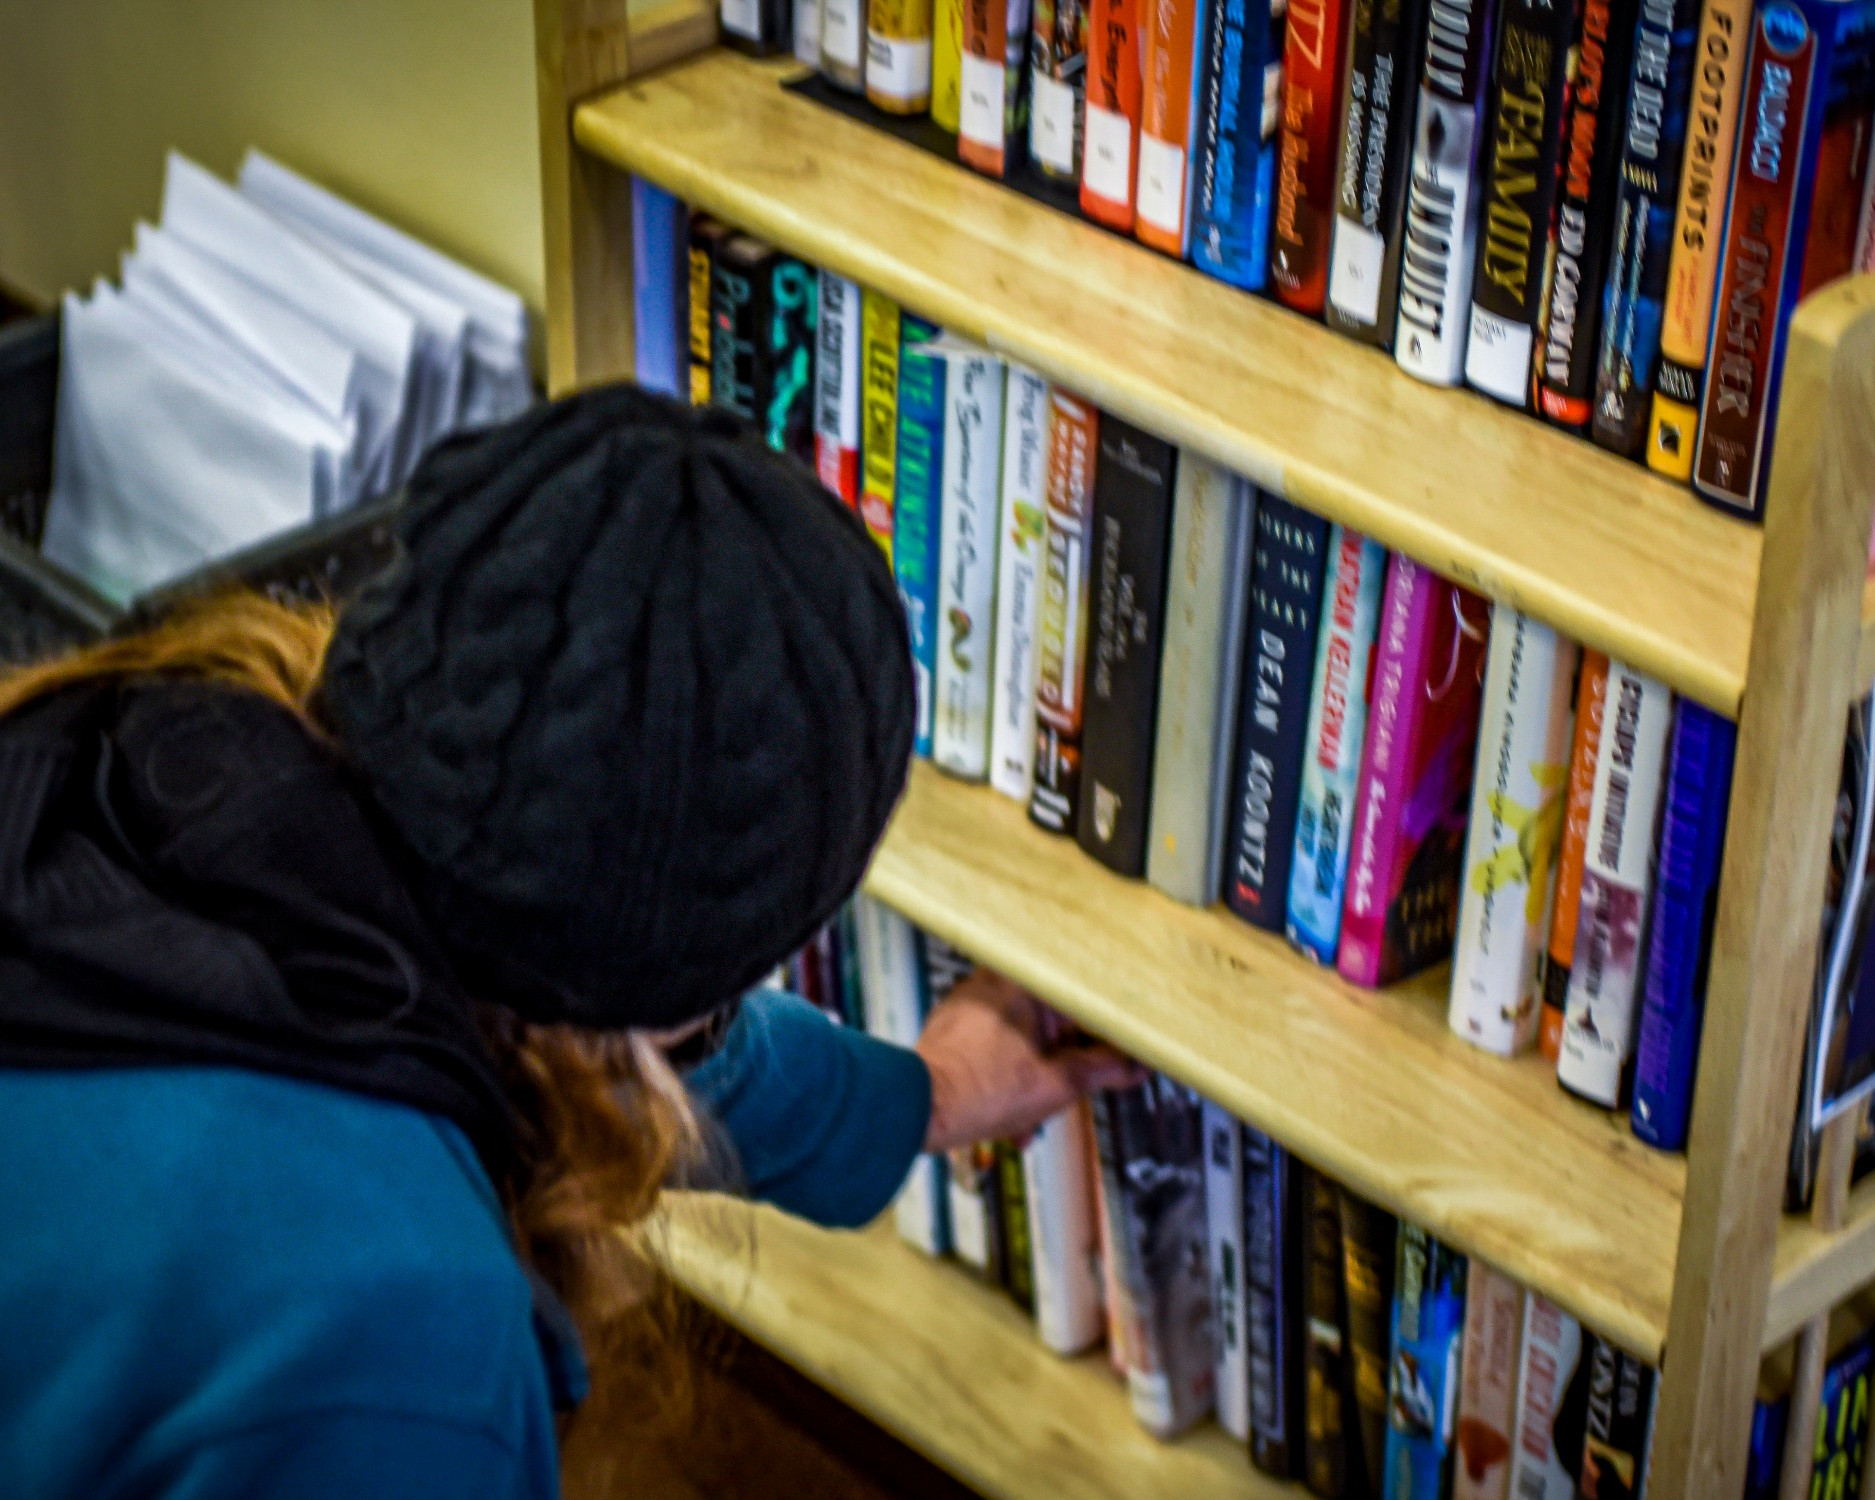 person browsing books from a shelf